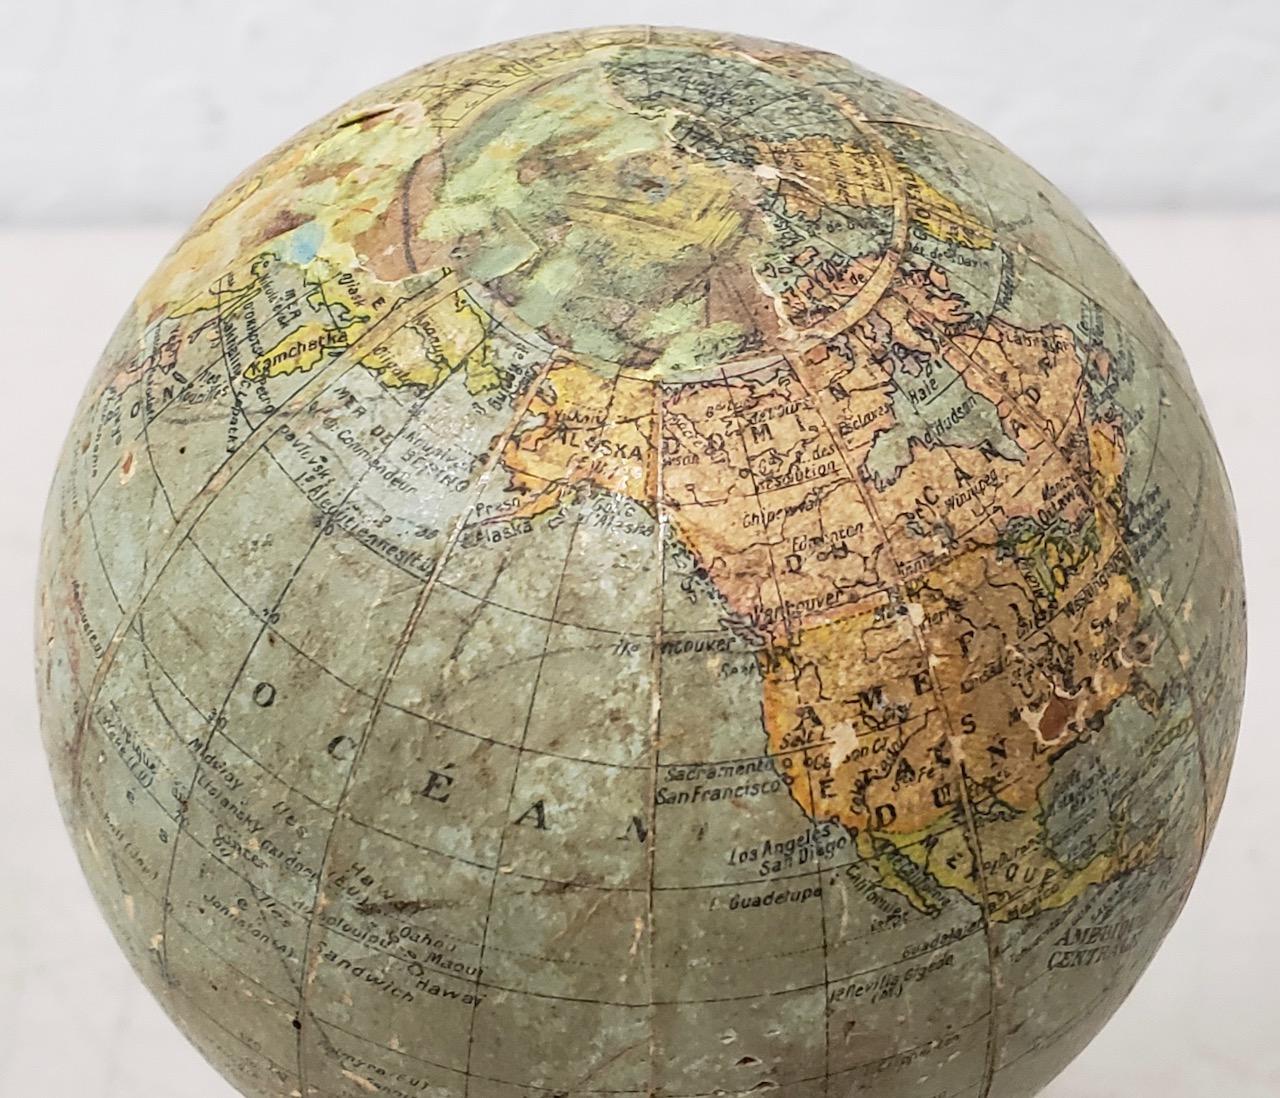 Rare 19th century terrestrial globe by G. Thomas, Editeur & Globe Maker, Paris, circa 1890s

The globe sits atop a wooden stand and measures 4